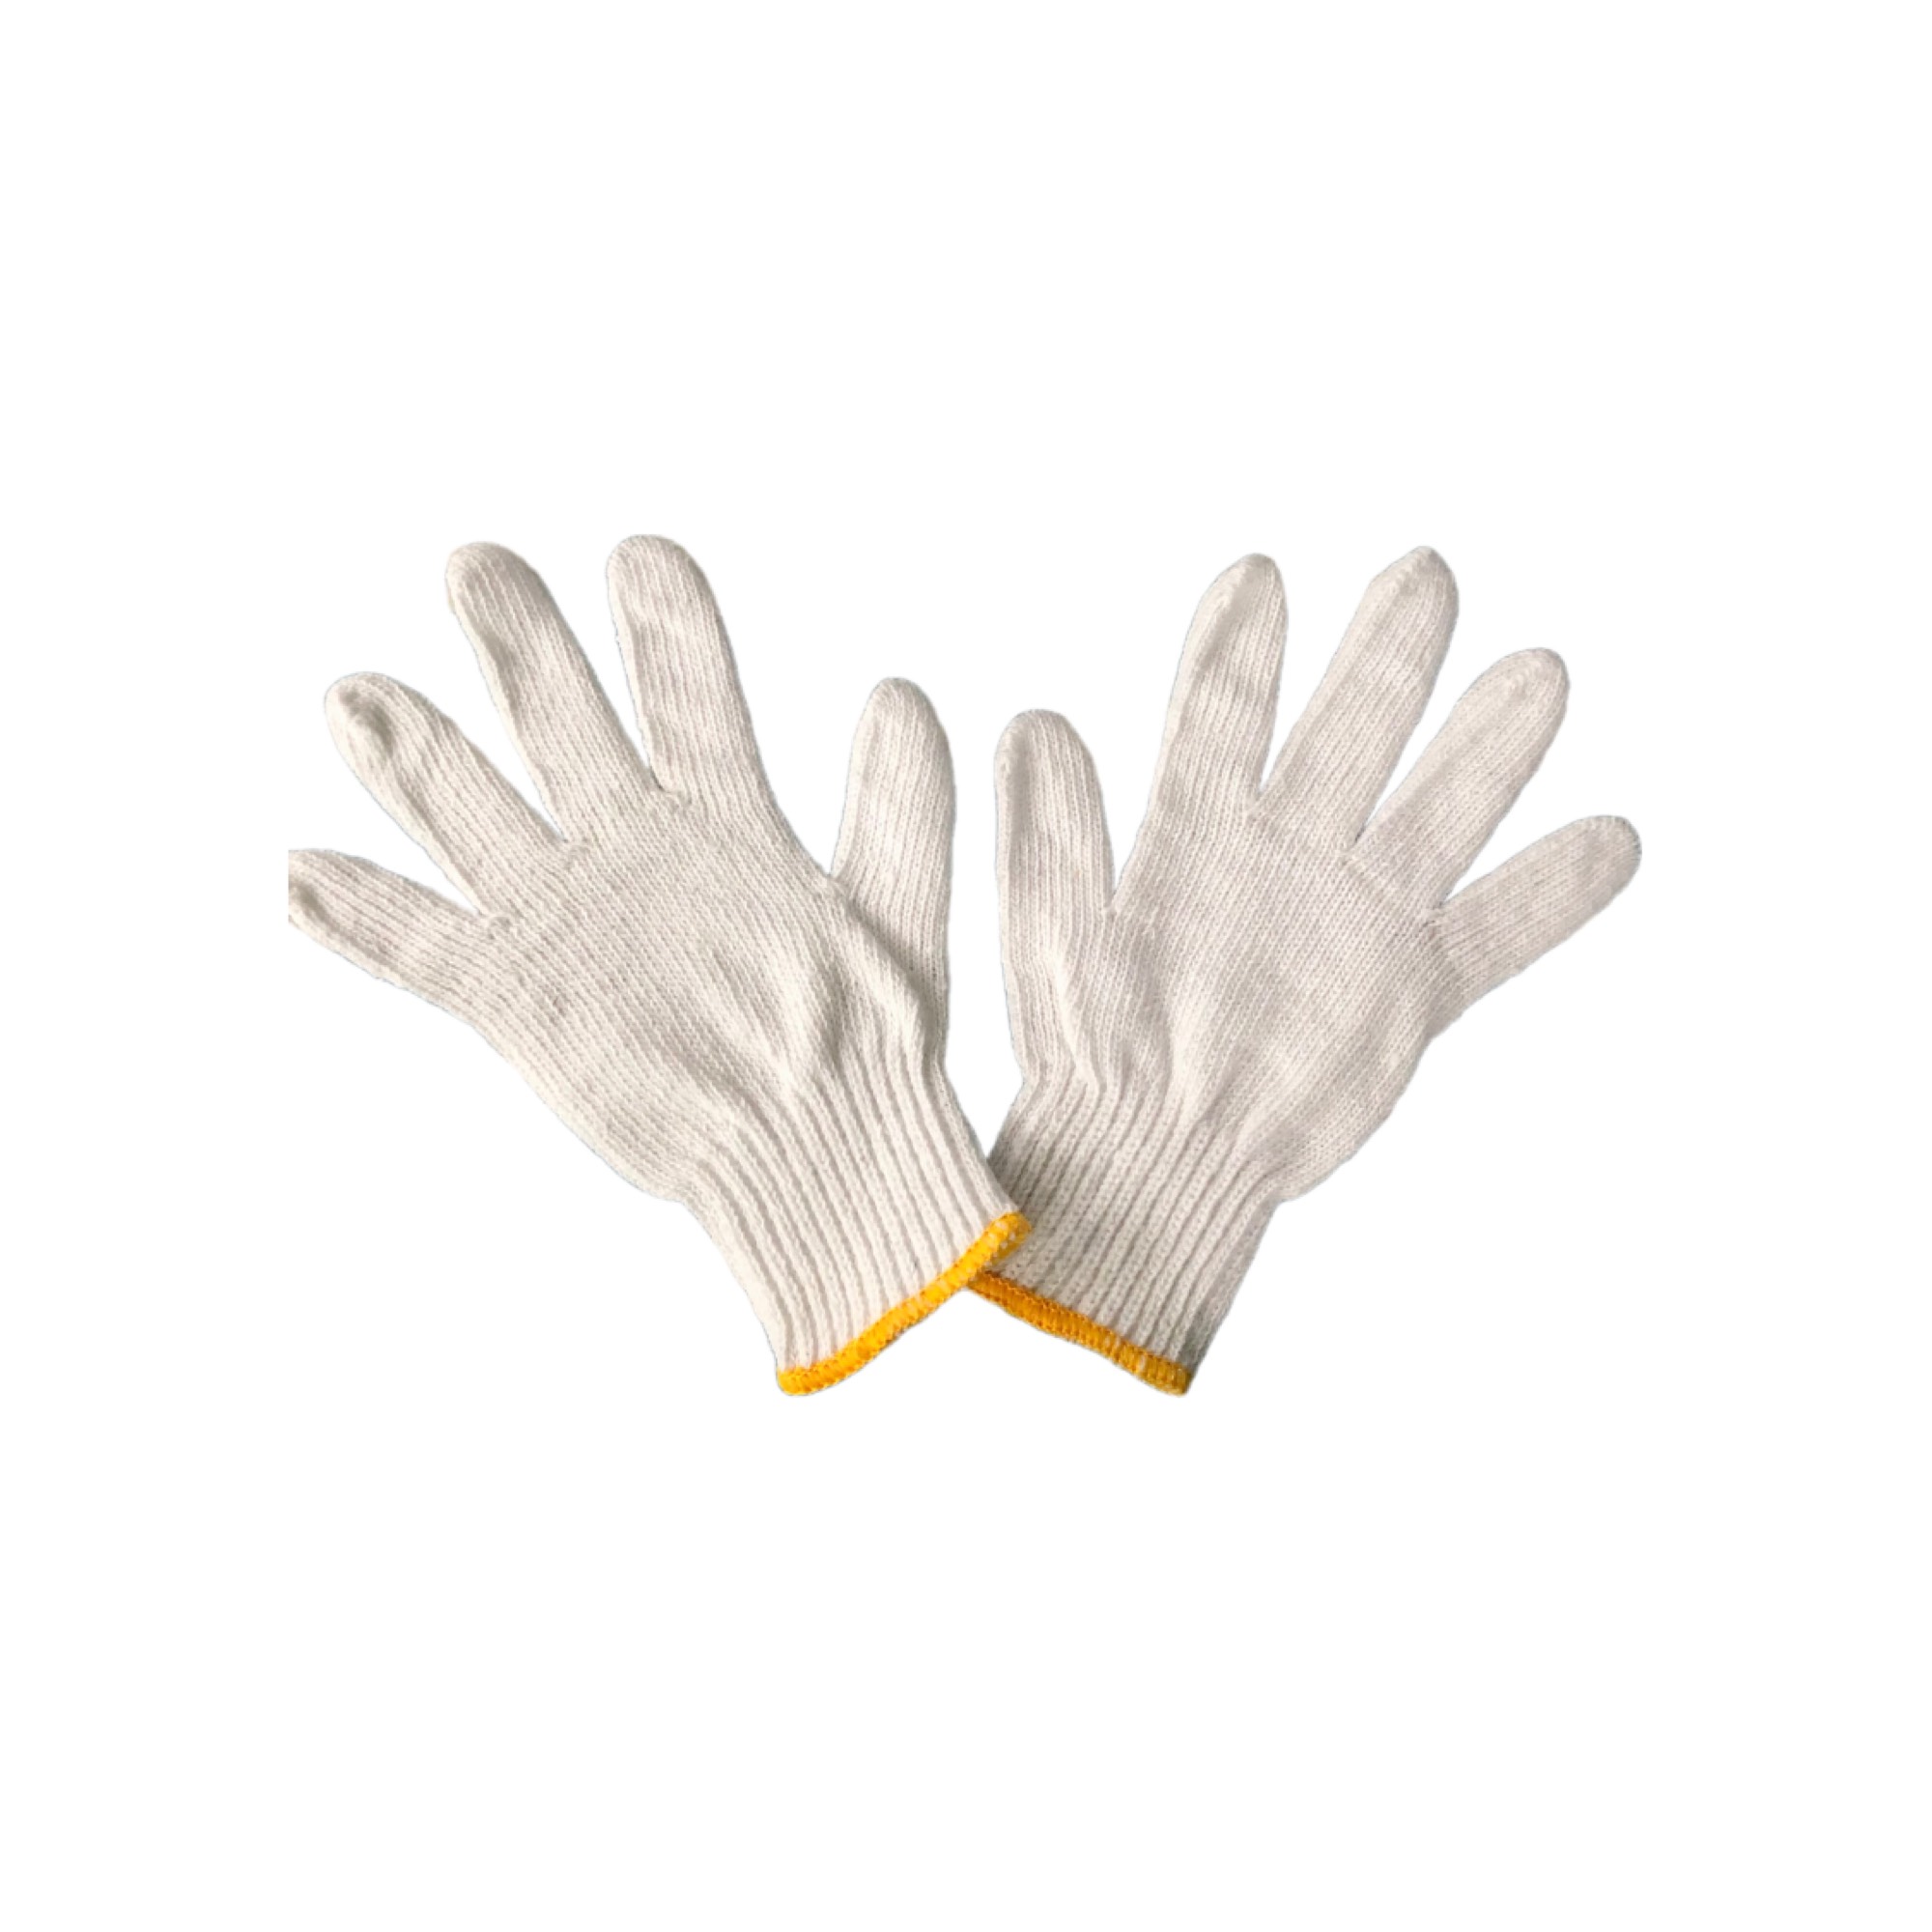 Gloves manufacturers